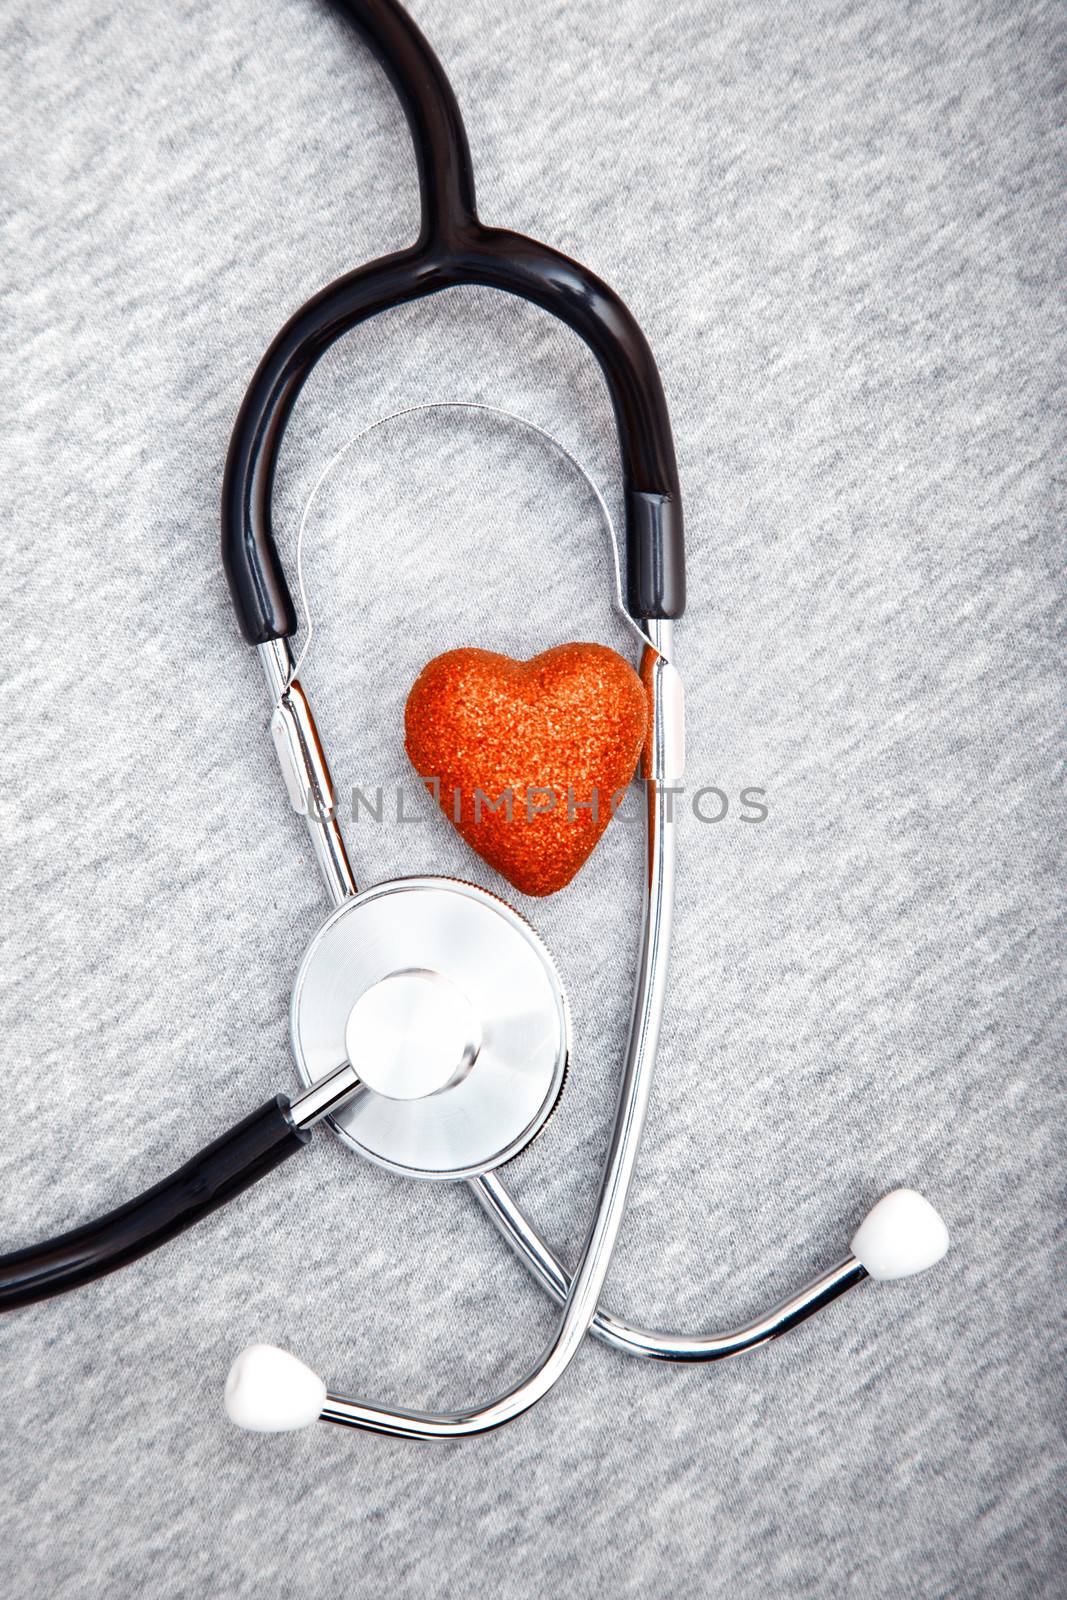 Medical stethoscope and heart on a blue textured background